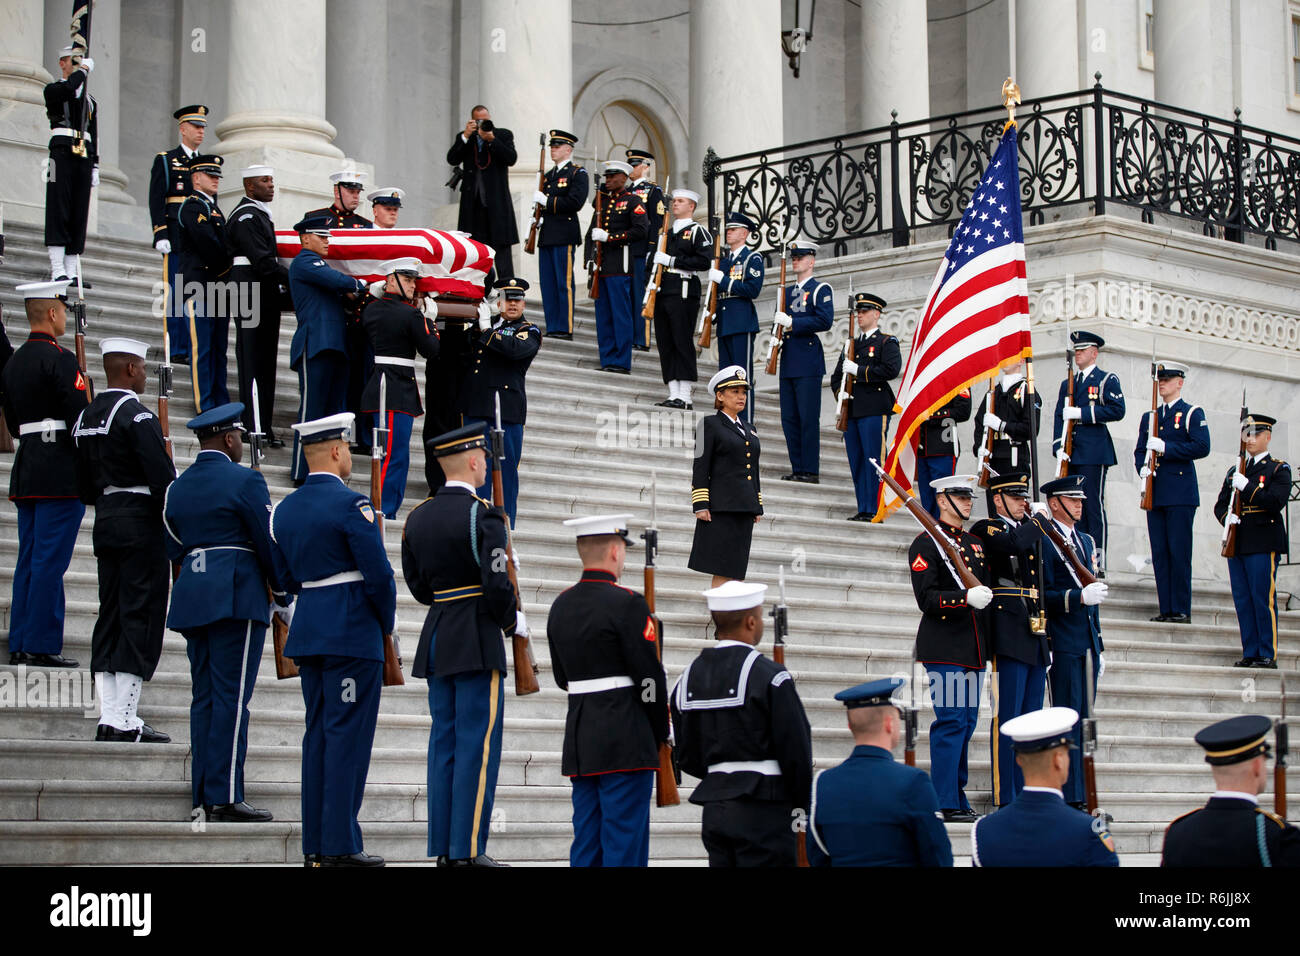 The flag-draped casket of former President George H.W. Bush is carried by a joint services military honor guard from the U.S. Capitol, Wednesday, Dec. 5, 2018, in Washington.  Credit: Shawn Thew / Pool via CNP | usage worldwide Stock Photo